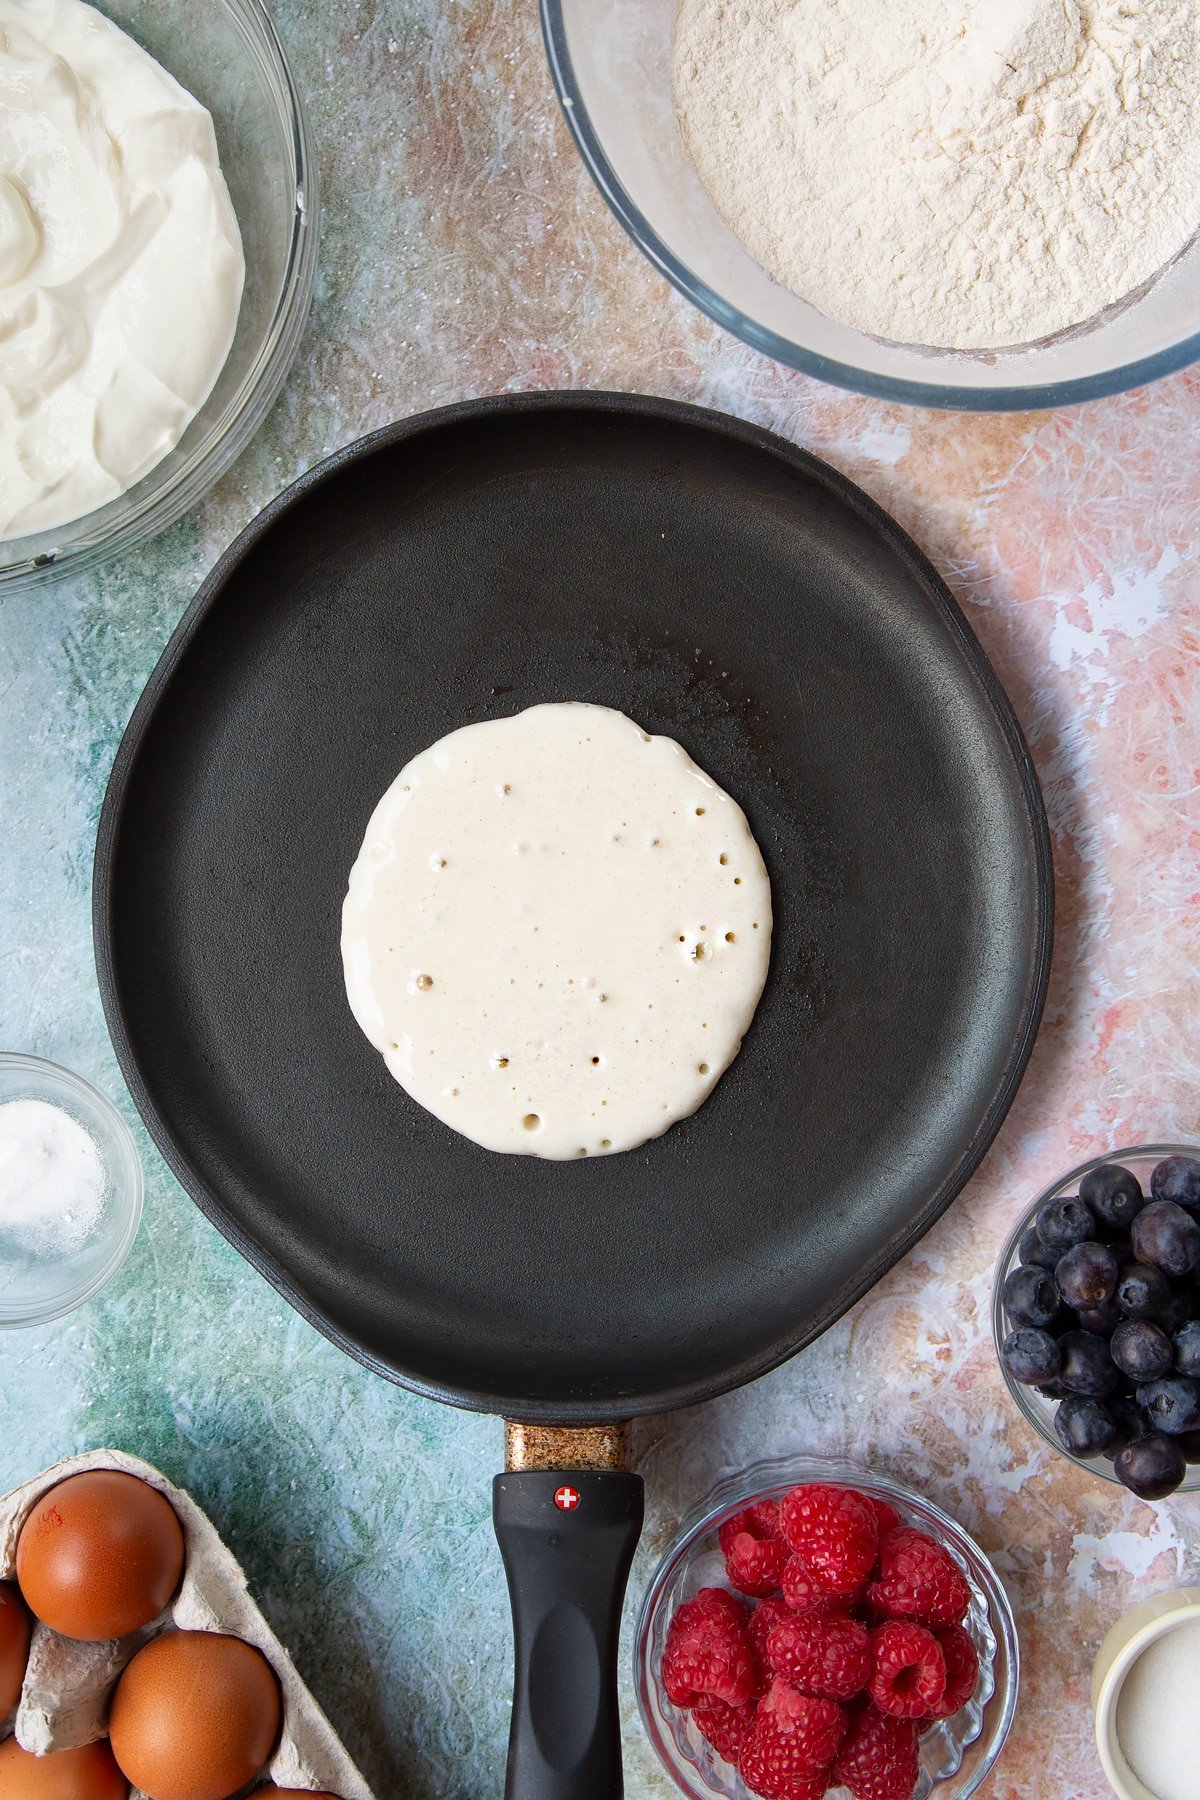 A hot frying pan with a circle of pancake batter in it, which is forming bubbles on the surface. Berries and ingredients to make skyr pancakes surround the pan.